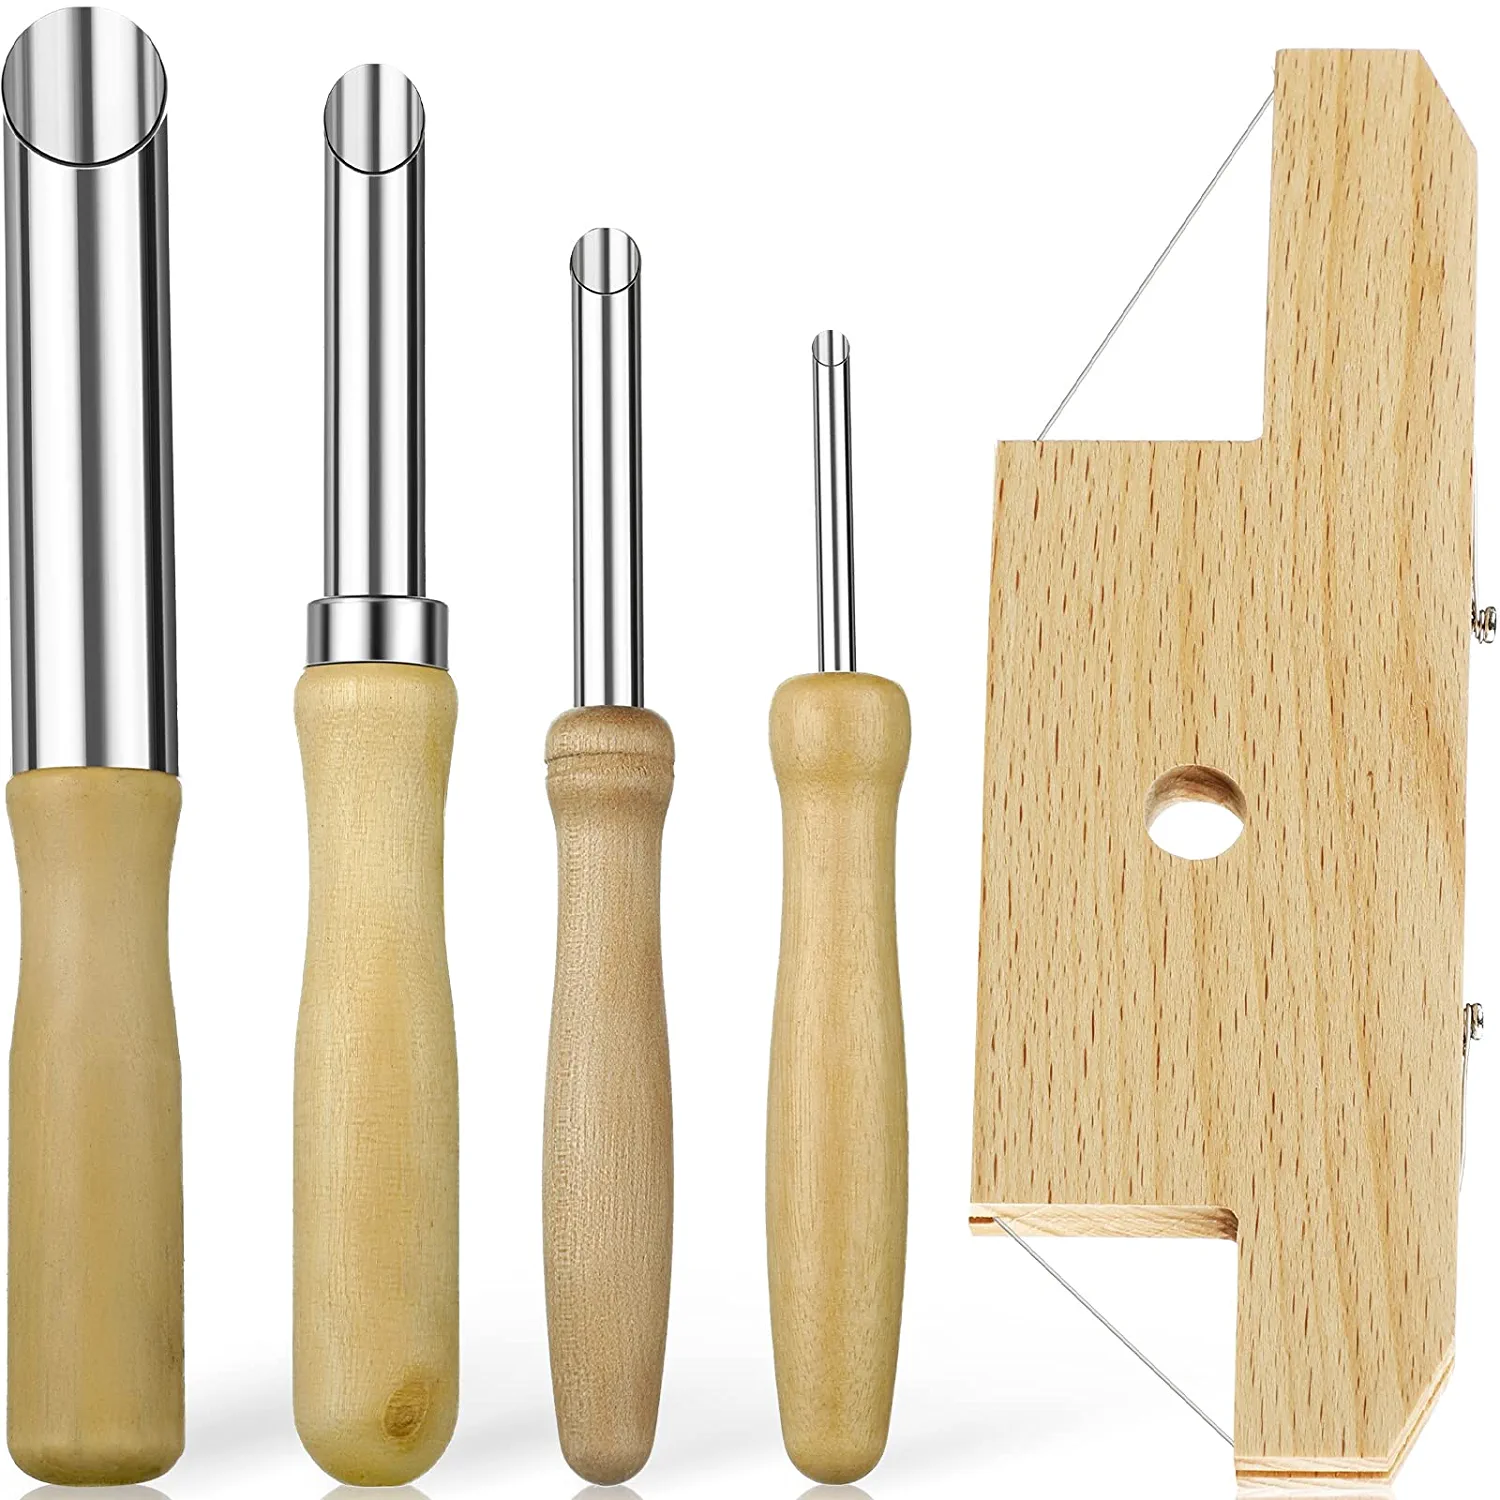 5 Pcs Pottery Clay Tools Set Includes Wood And Wire Bevel Cutter And 4 Pcs Circu - £15.61 GBP